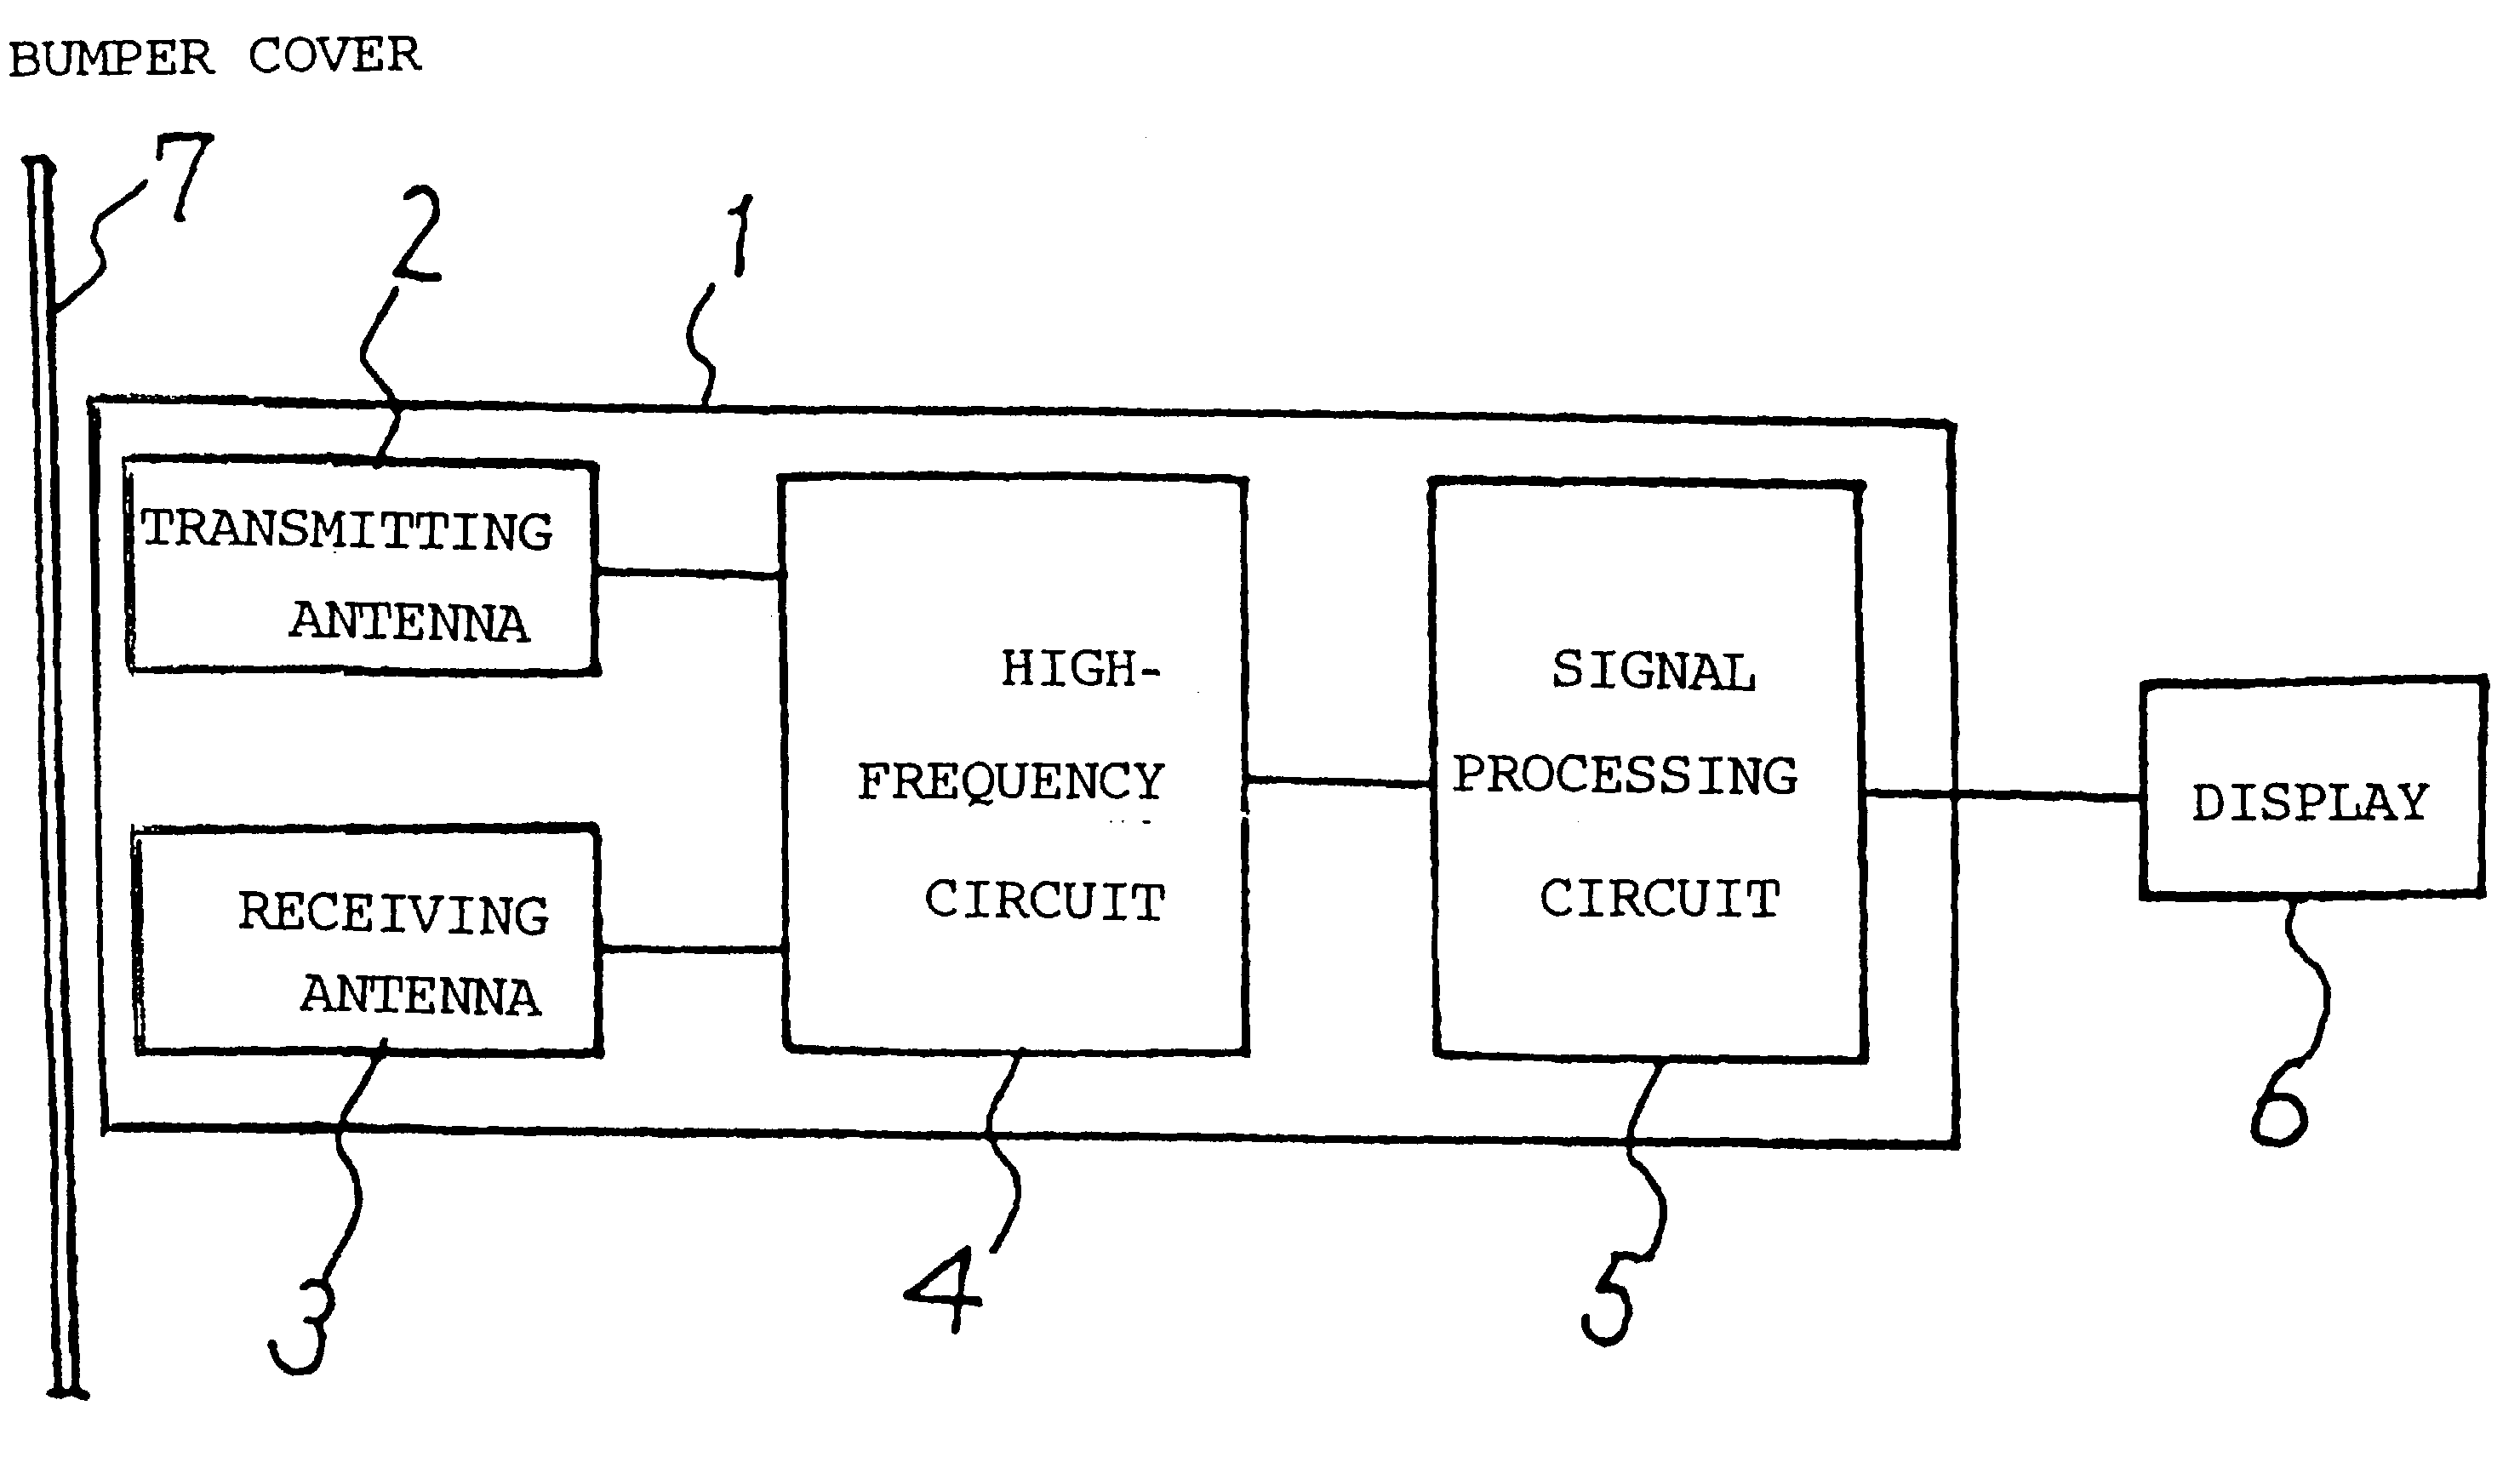 Peripheral monitor for monitoring periphery of vehicle